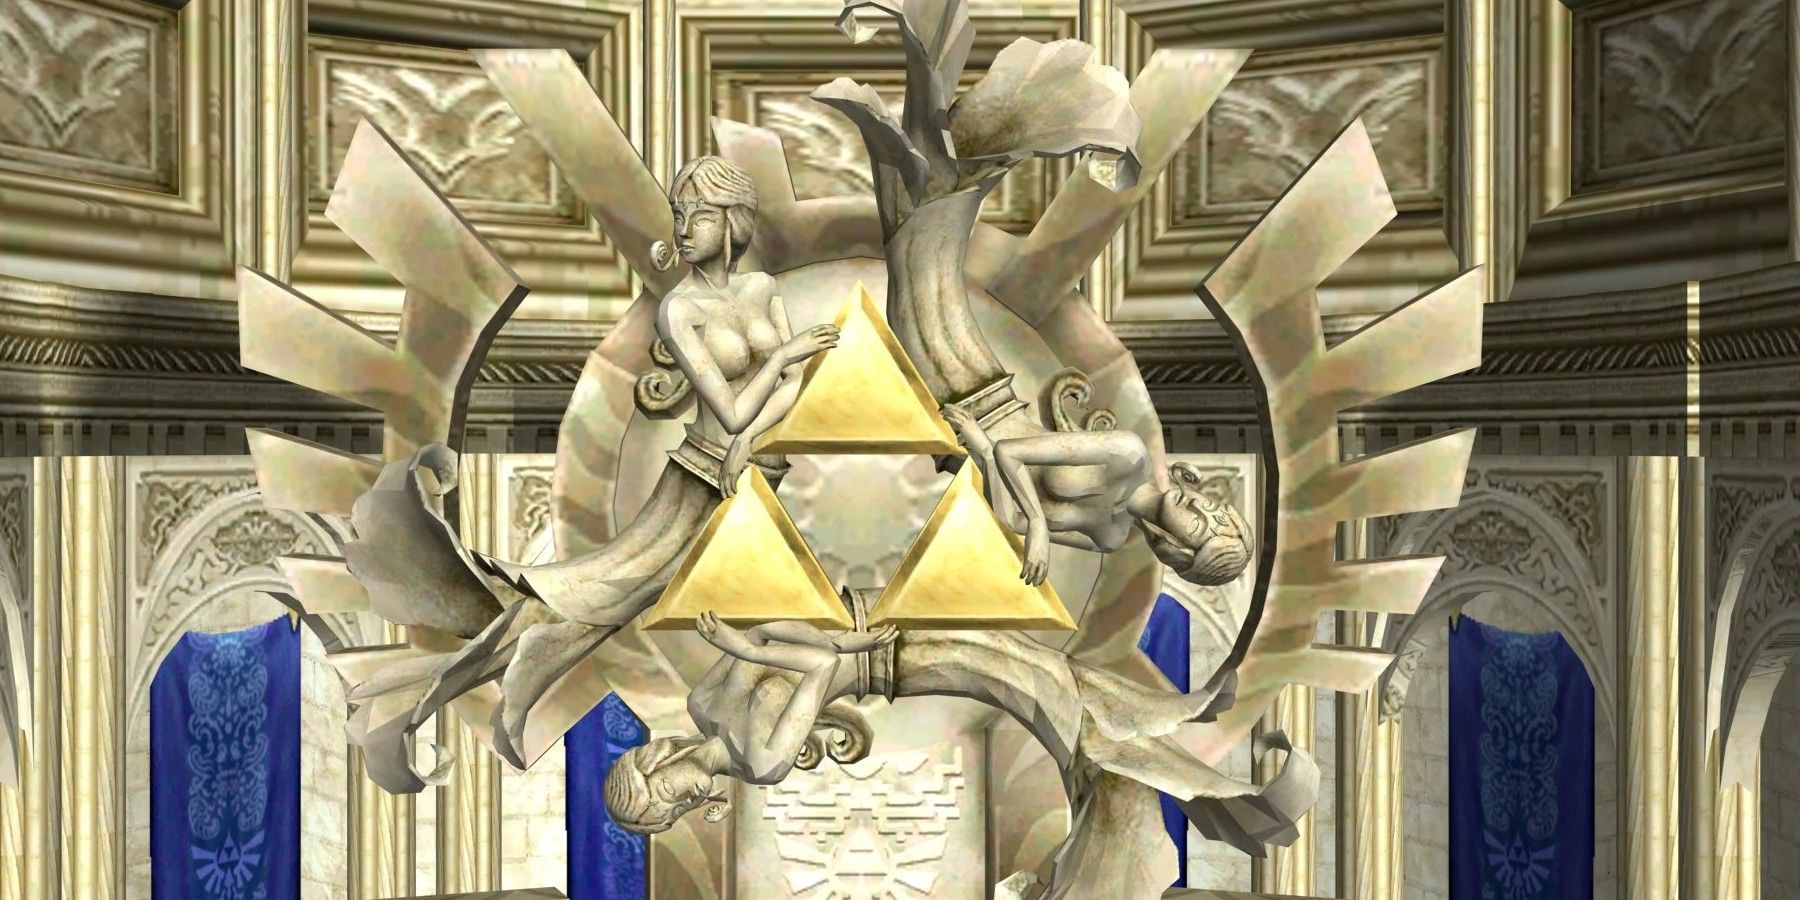 Statue of the Golden Goddesses Din, Farore, and Nayru holding the Triforce in The Legend of Zelda: Twilight Princess